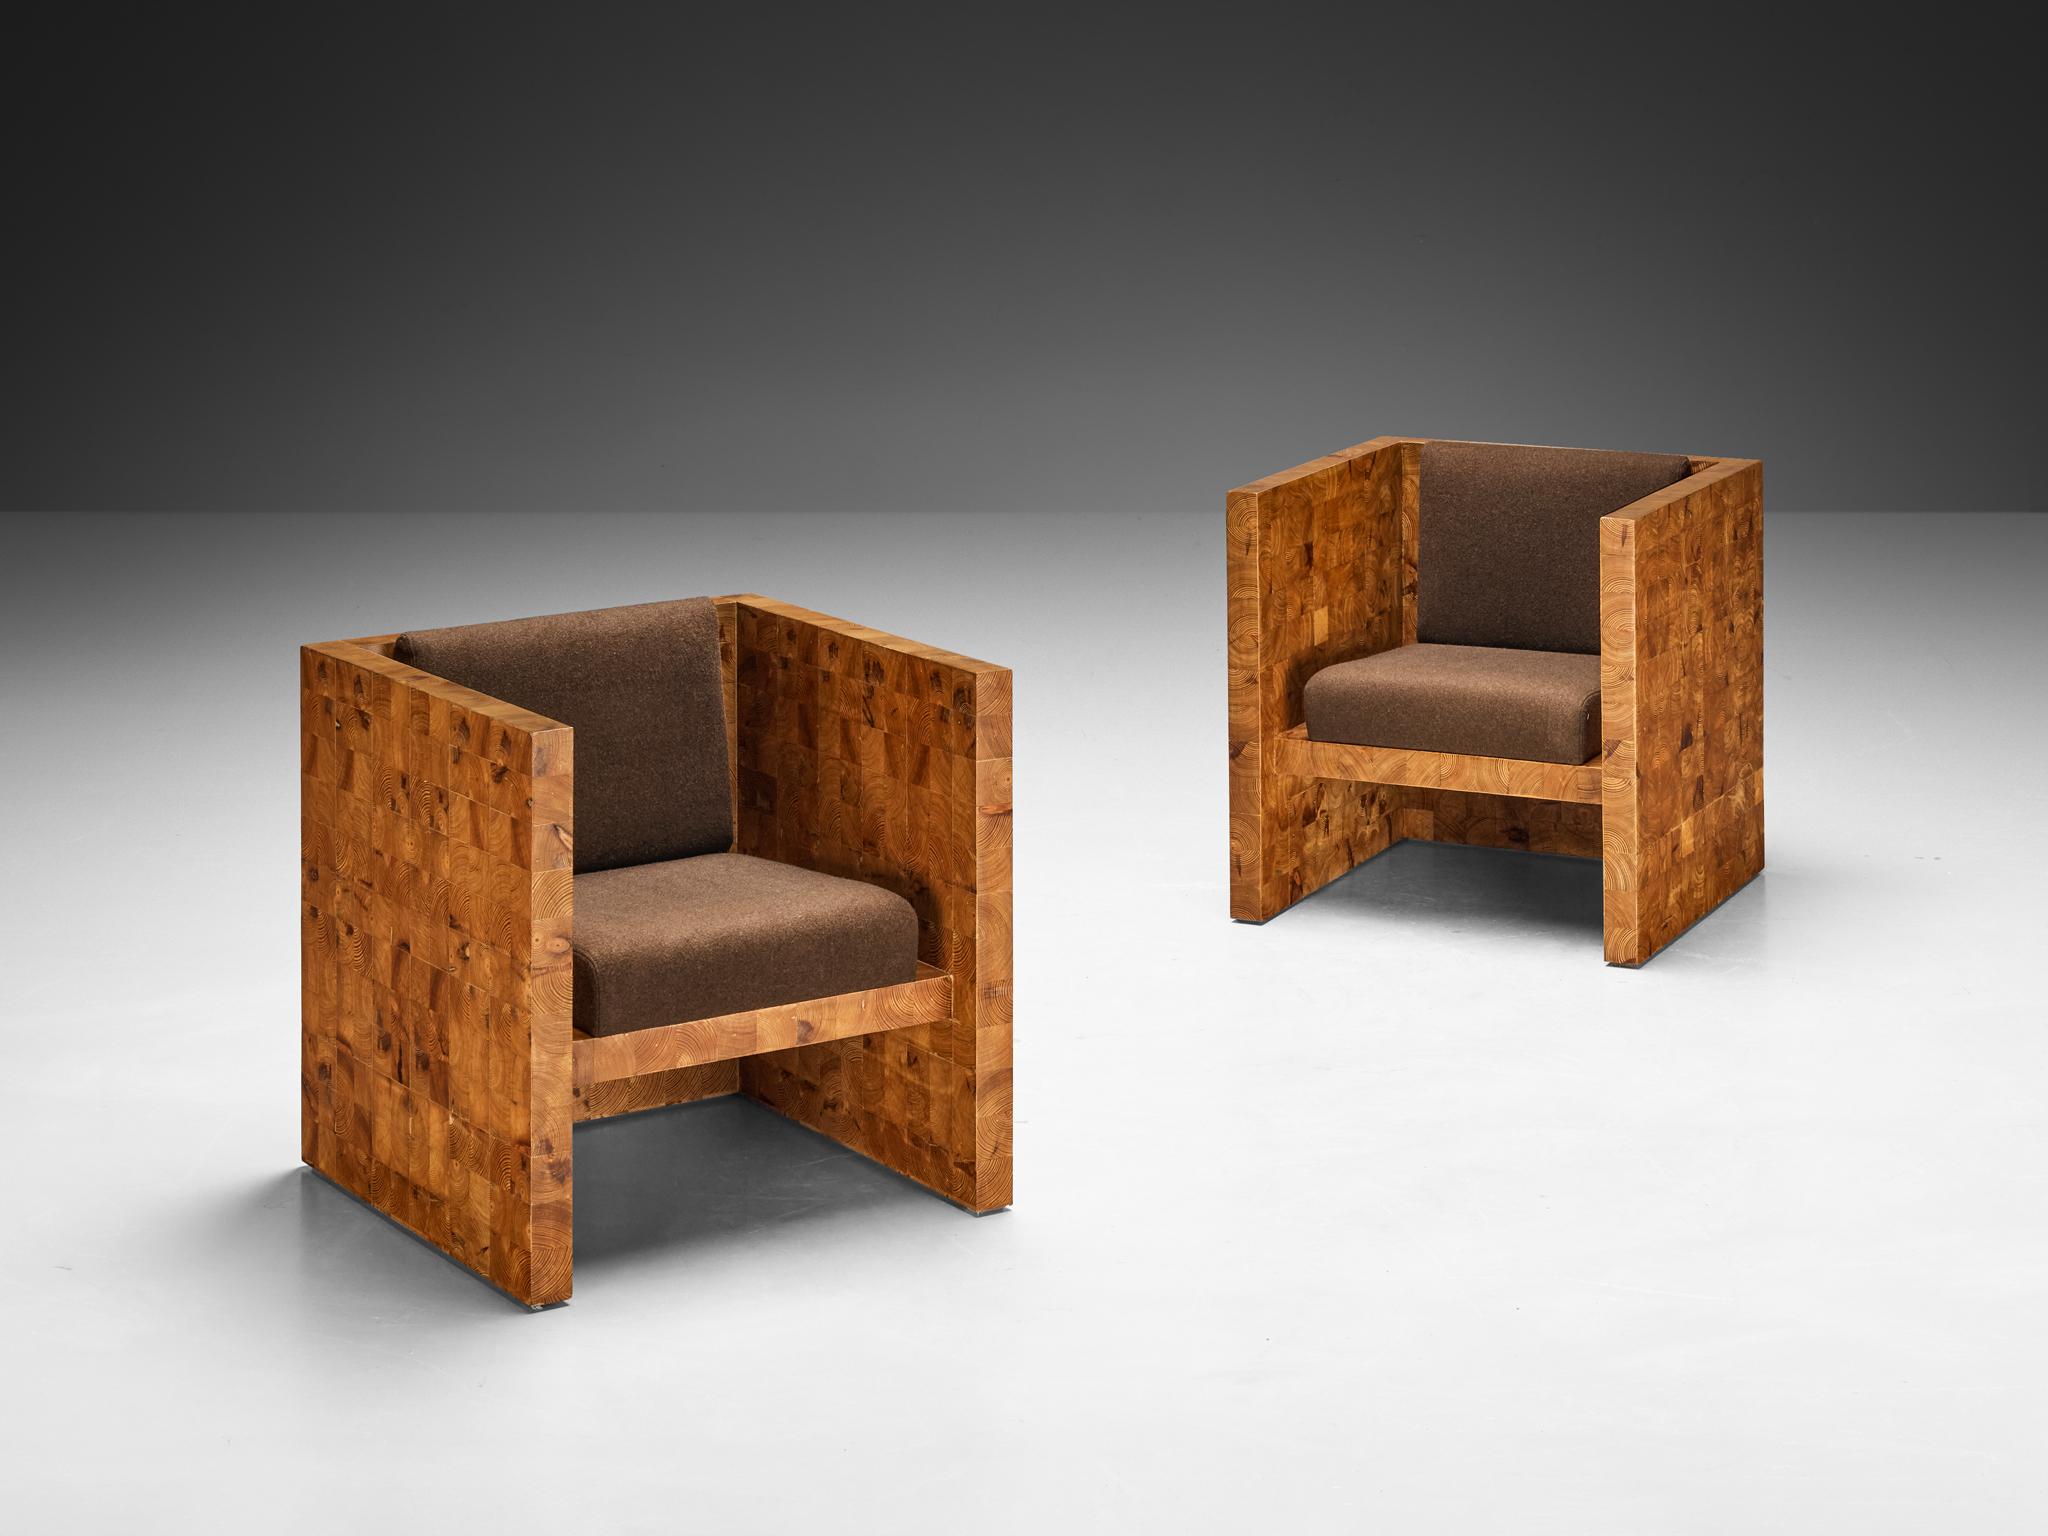 Pair of lounge chairs, pine, fabric, Europe, 1980s

A distinctive ensemble of armchairs that exude sturdiness, characterized by its robust and substantial silhouette with distinct sharply-angled contours. The chair is crafted using the end-grain